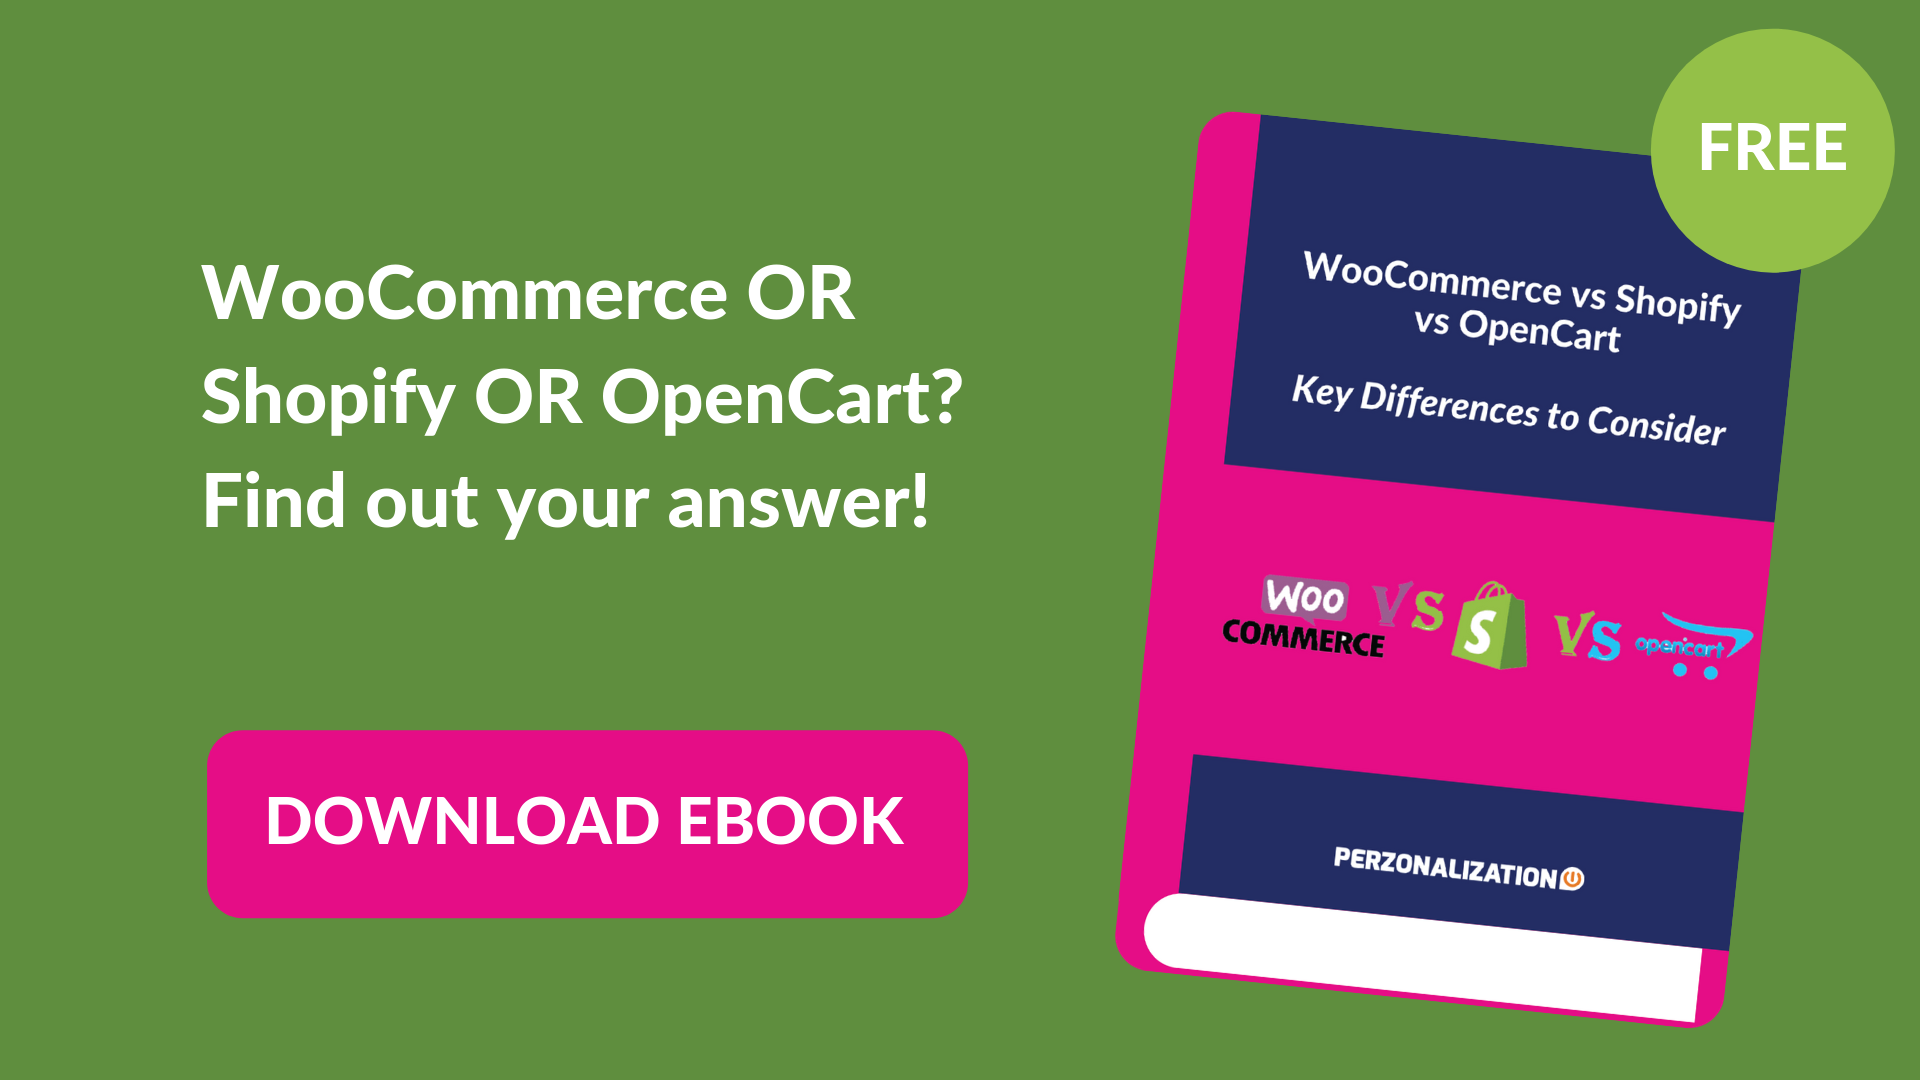 Download your free eBook: WooCommerce or Shopify or Opencart?